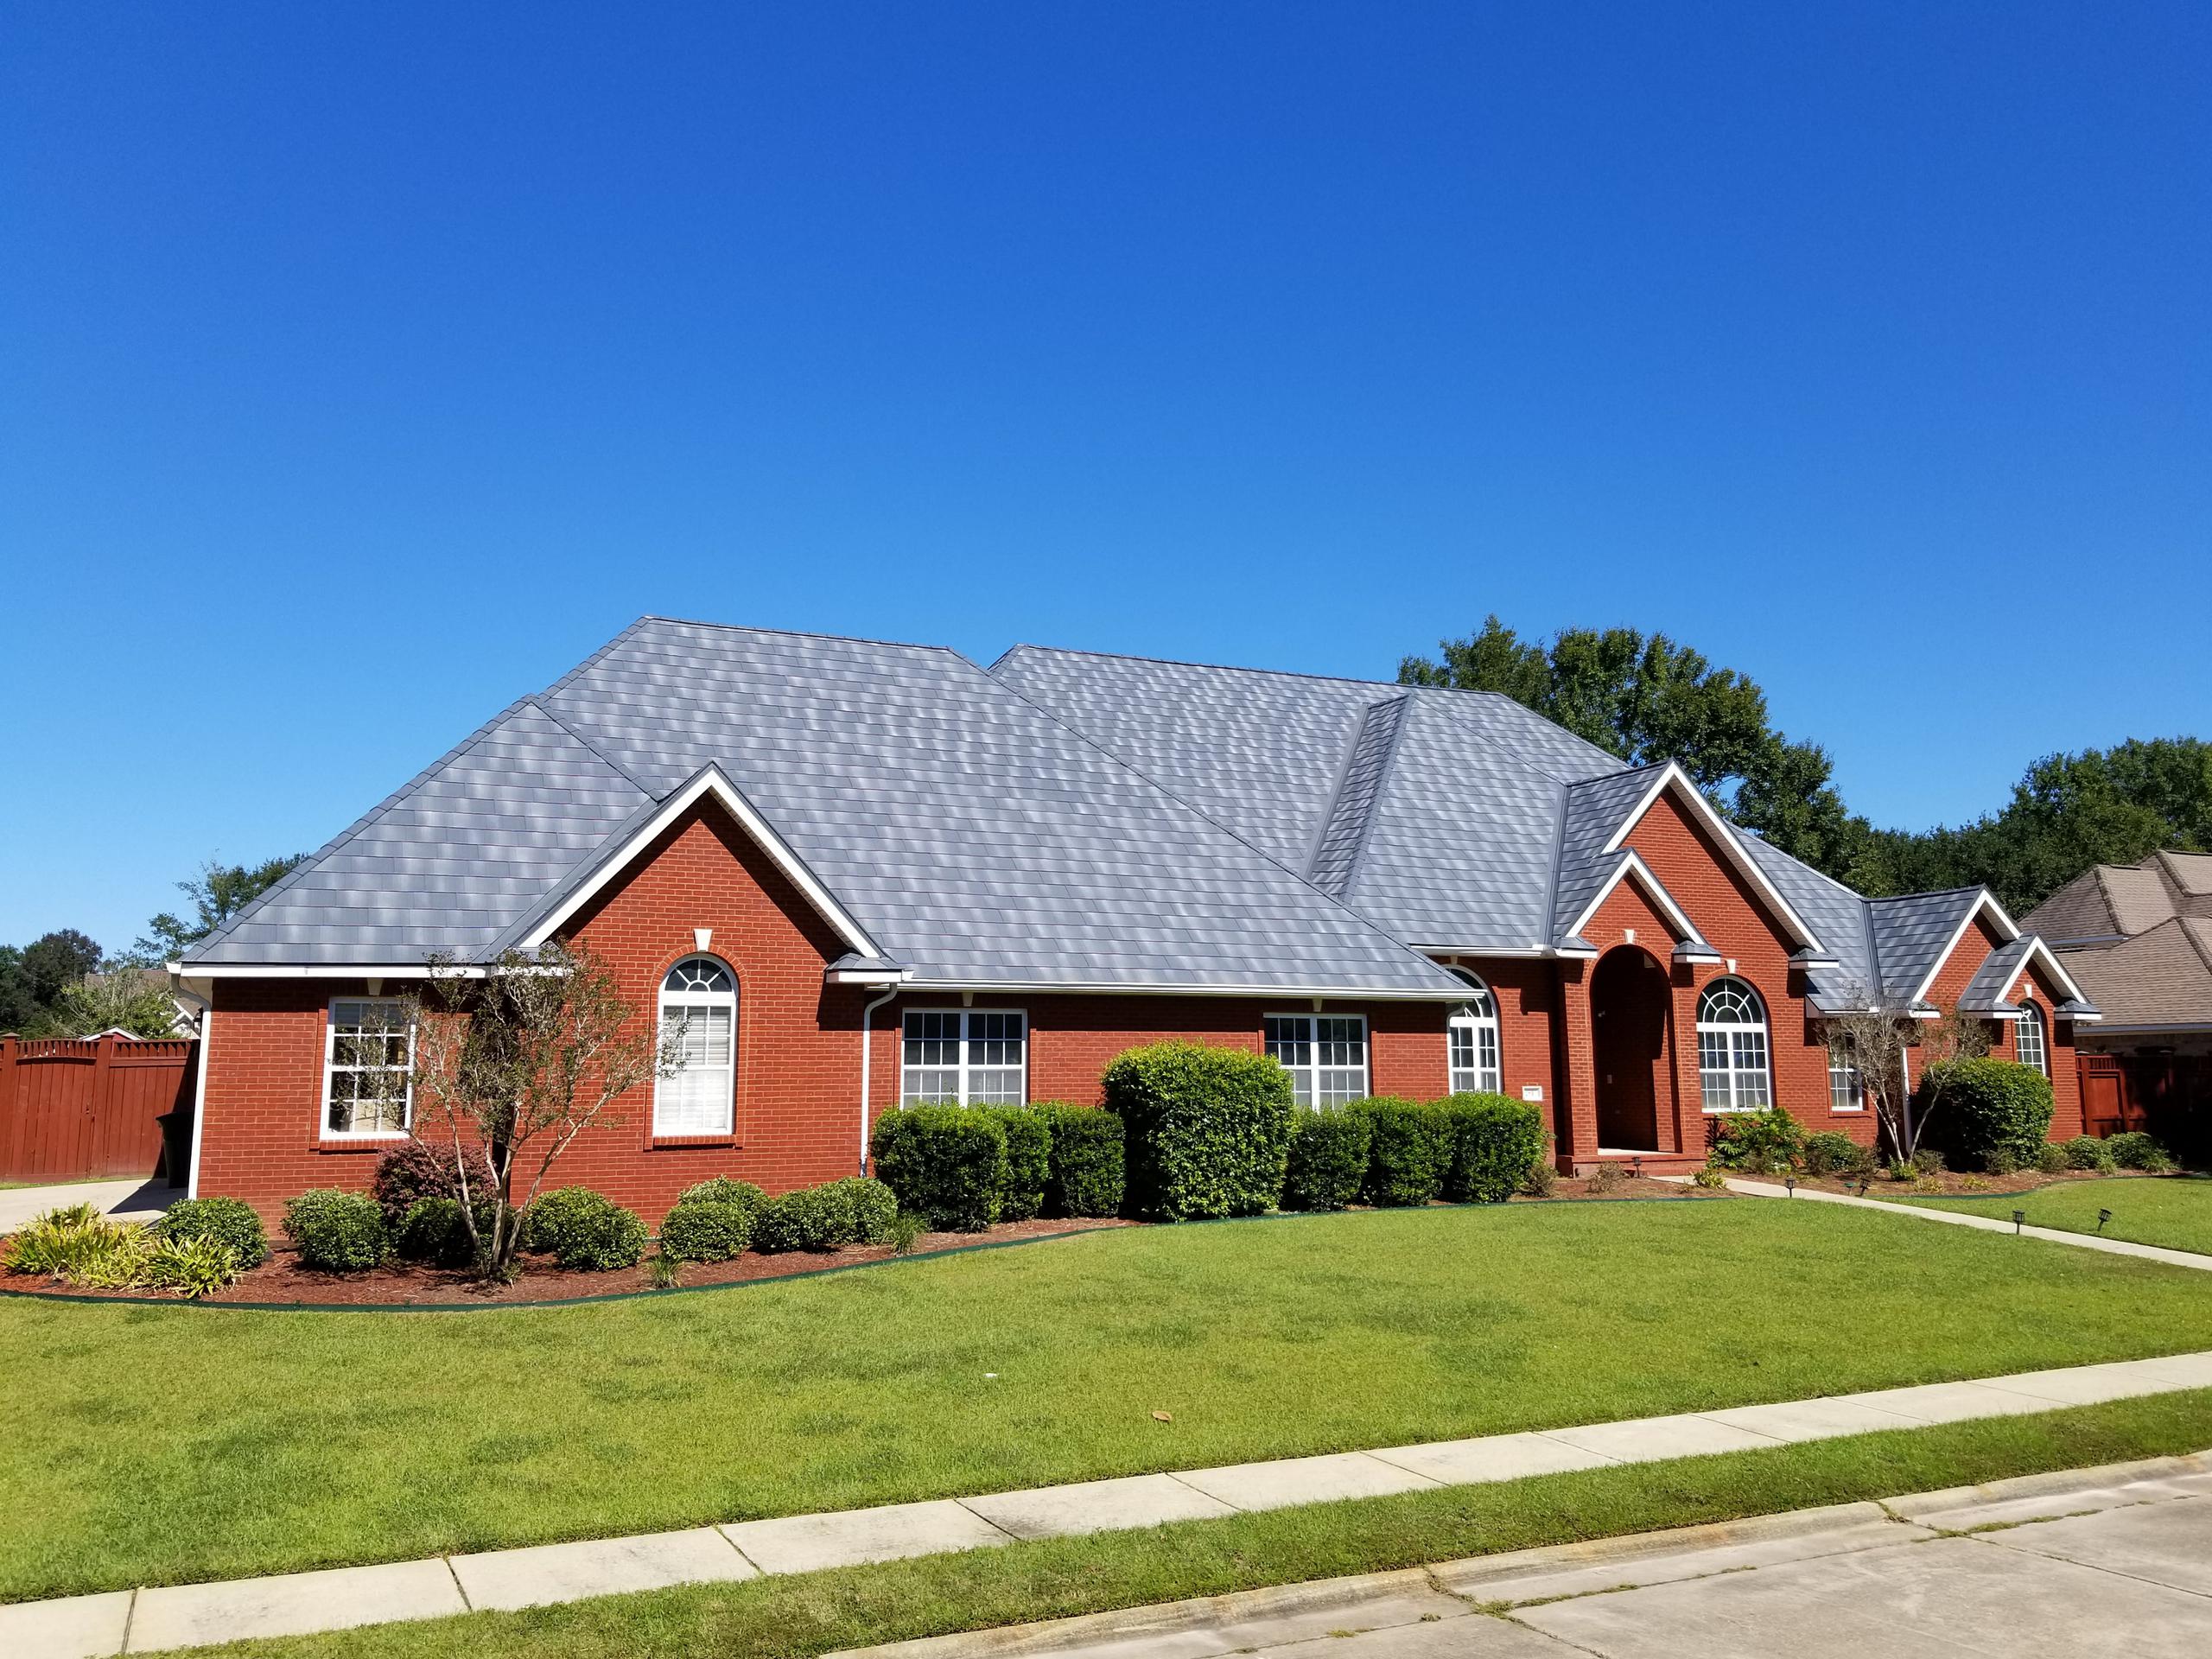 The award-winning Infiniti roofing from EDCO in Granite Gray Enhanced was selected for this red brick home to give it a distinctive appearance the is unmatched,